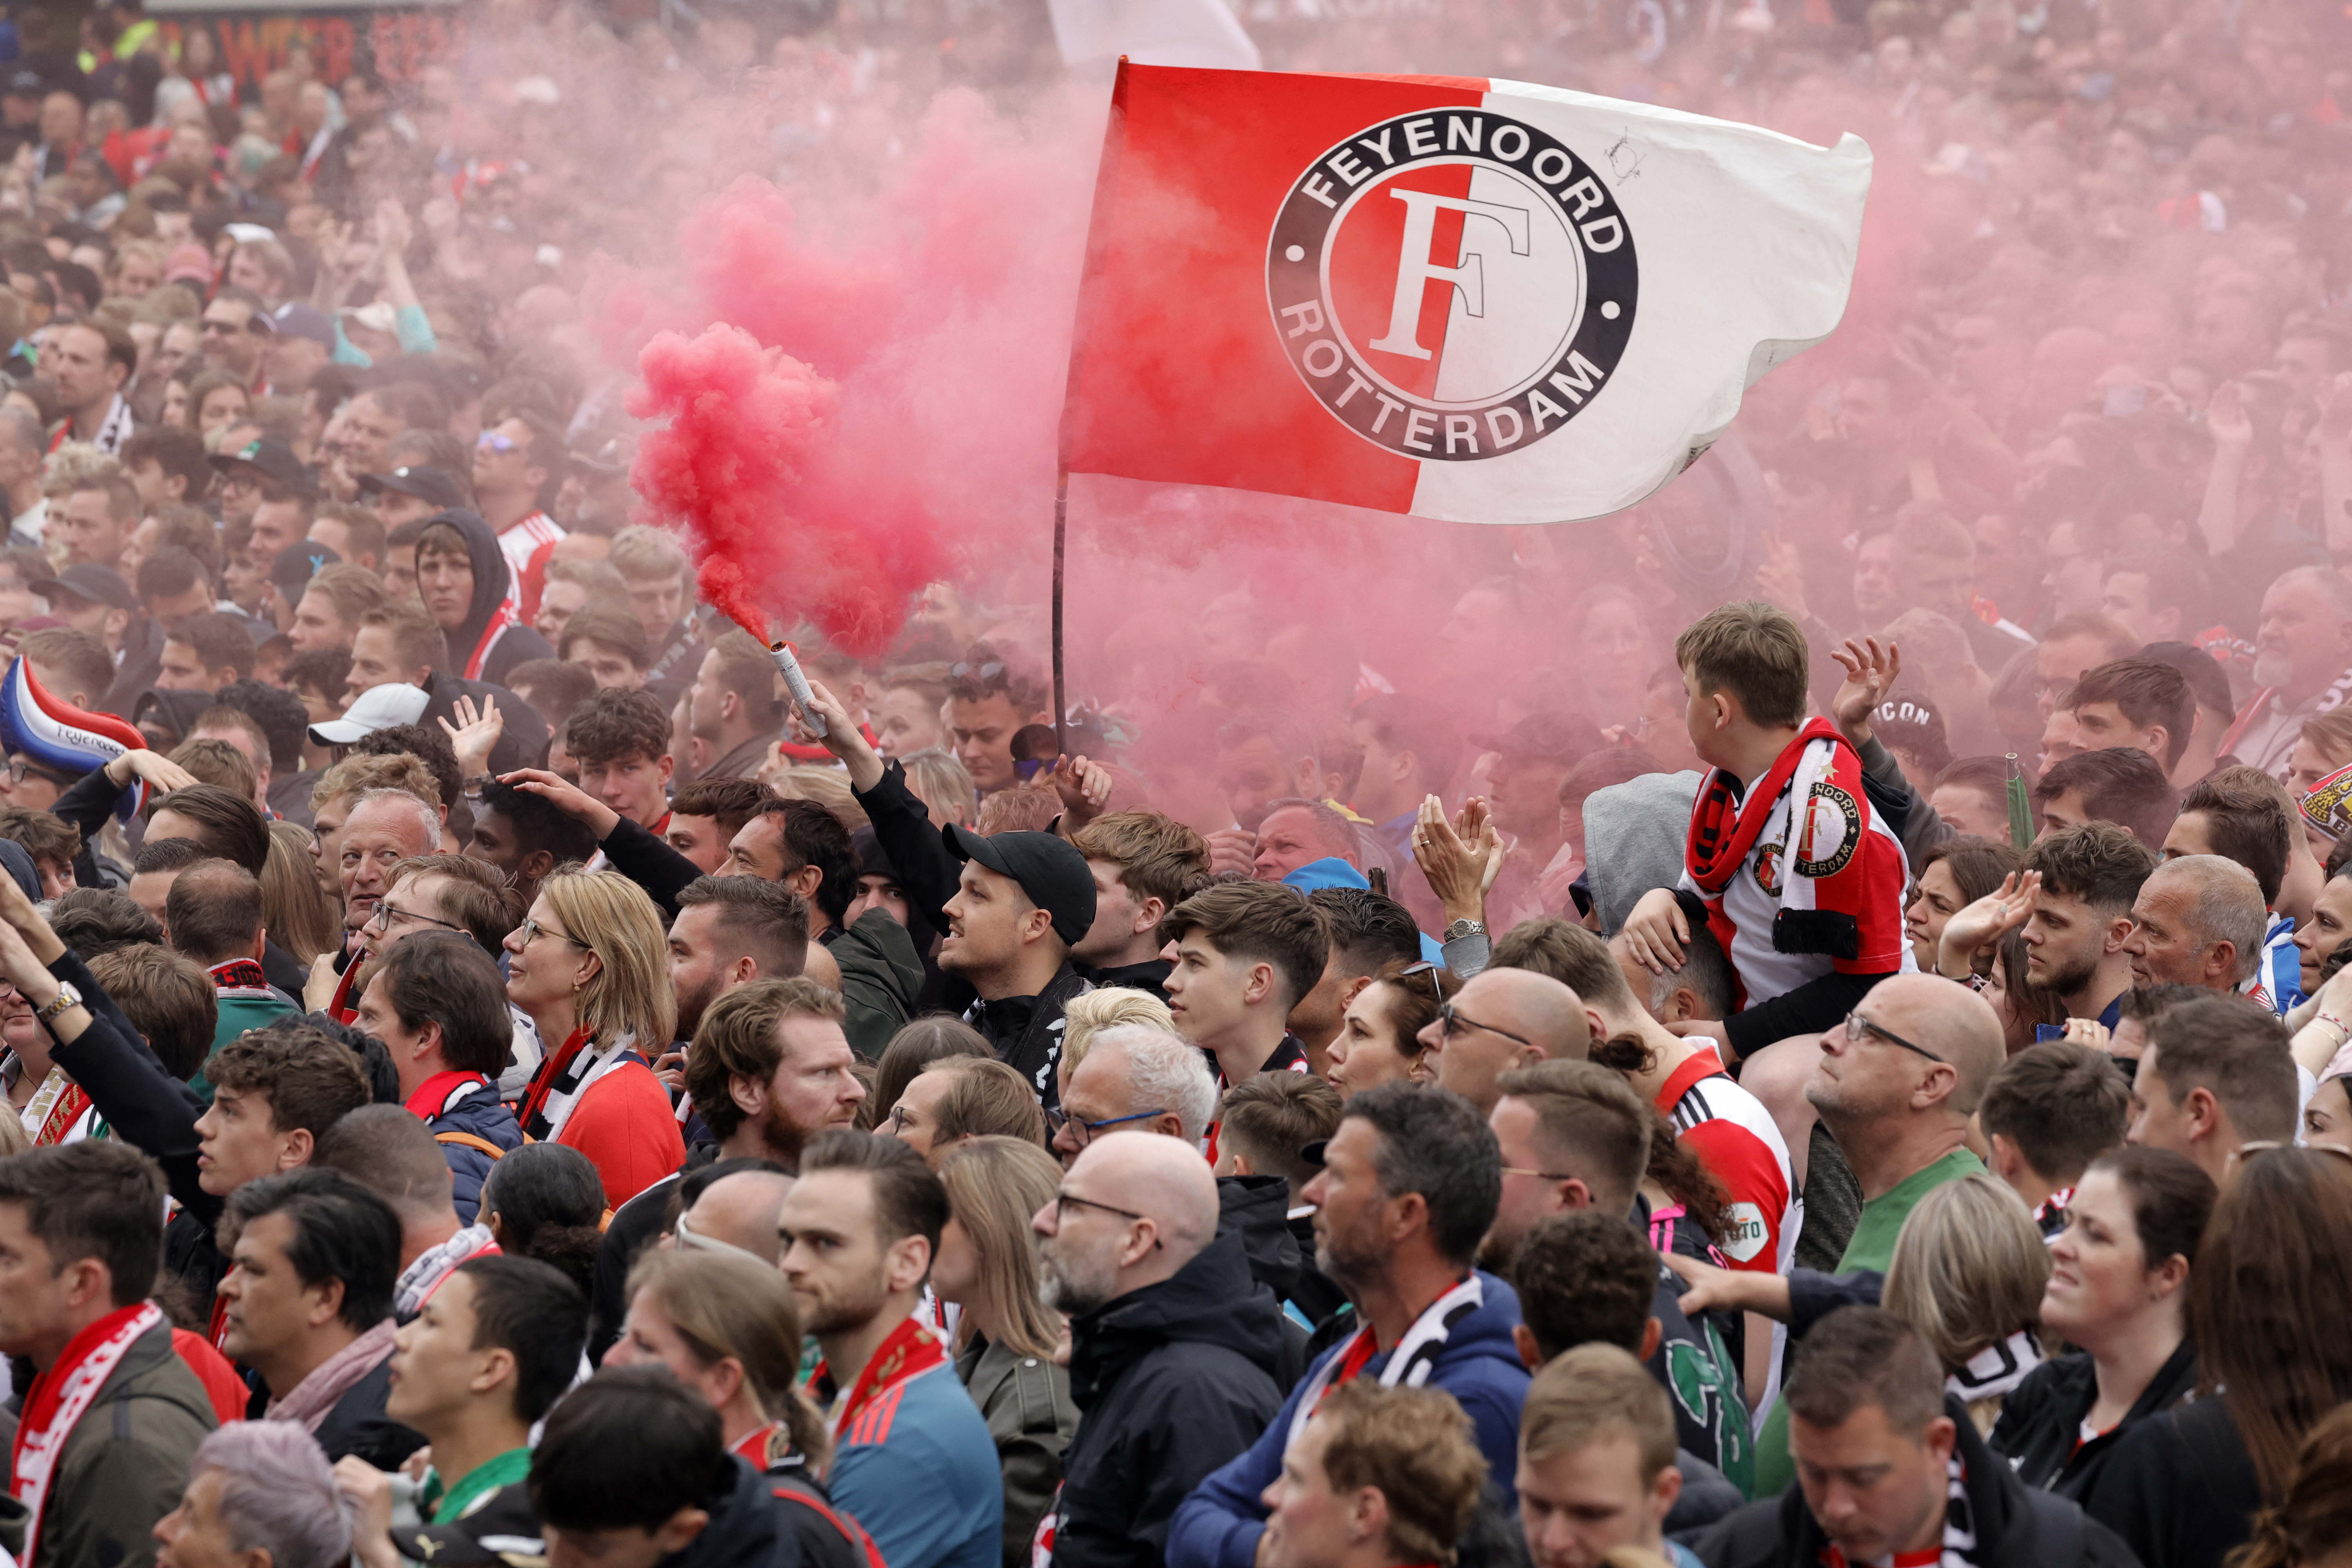 Feyenoord fans pack centre of Rotterdam to celebrate league title | Reuters